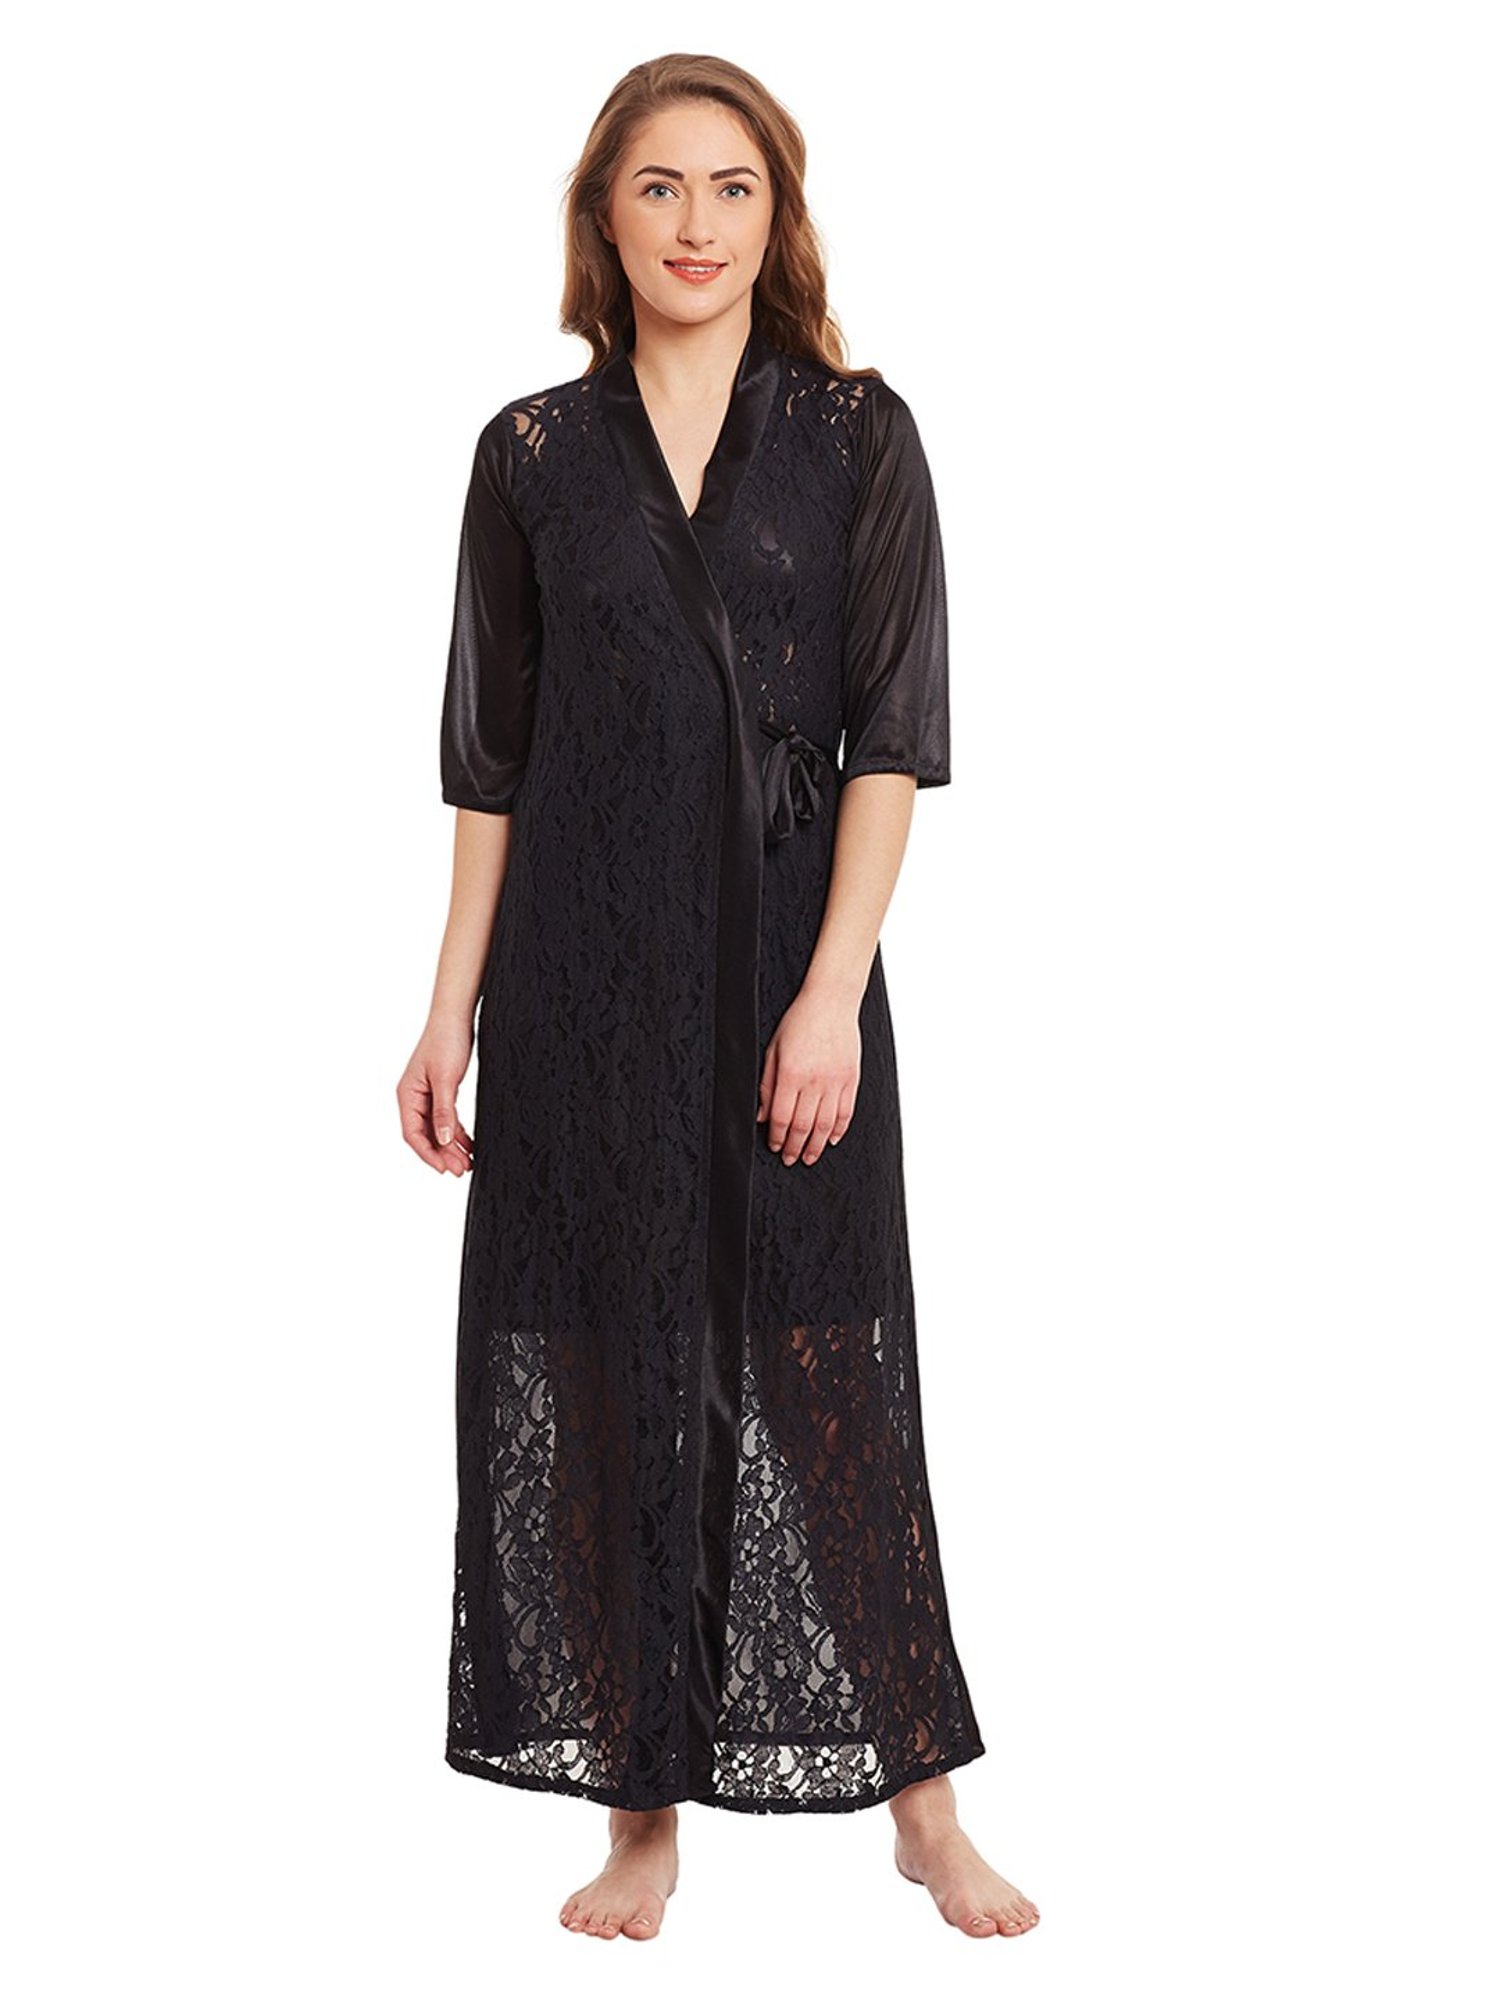 Buy Curvy Love Black Lace Night Gown for Women's Online @ Tata CLiQ